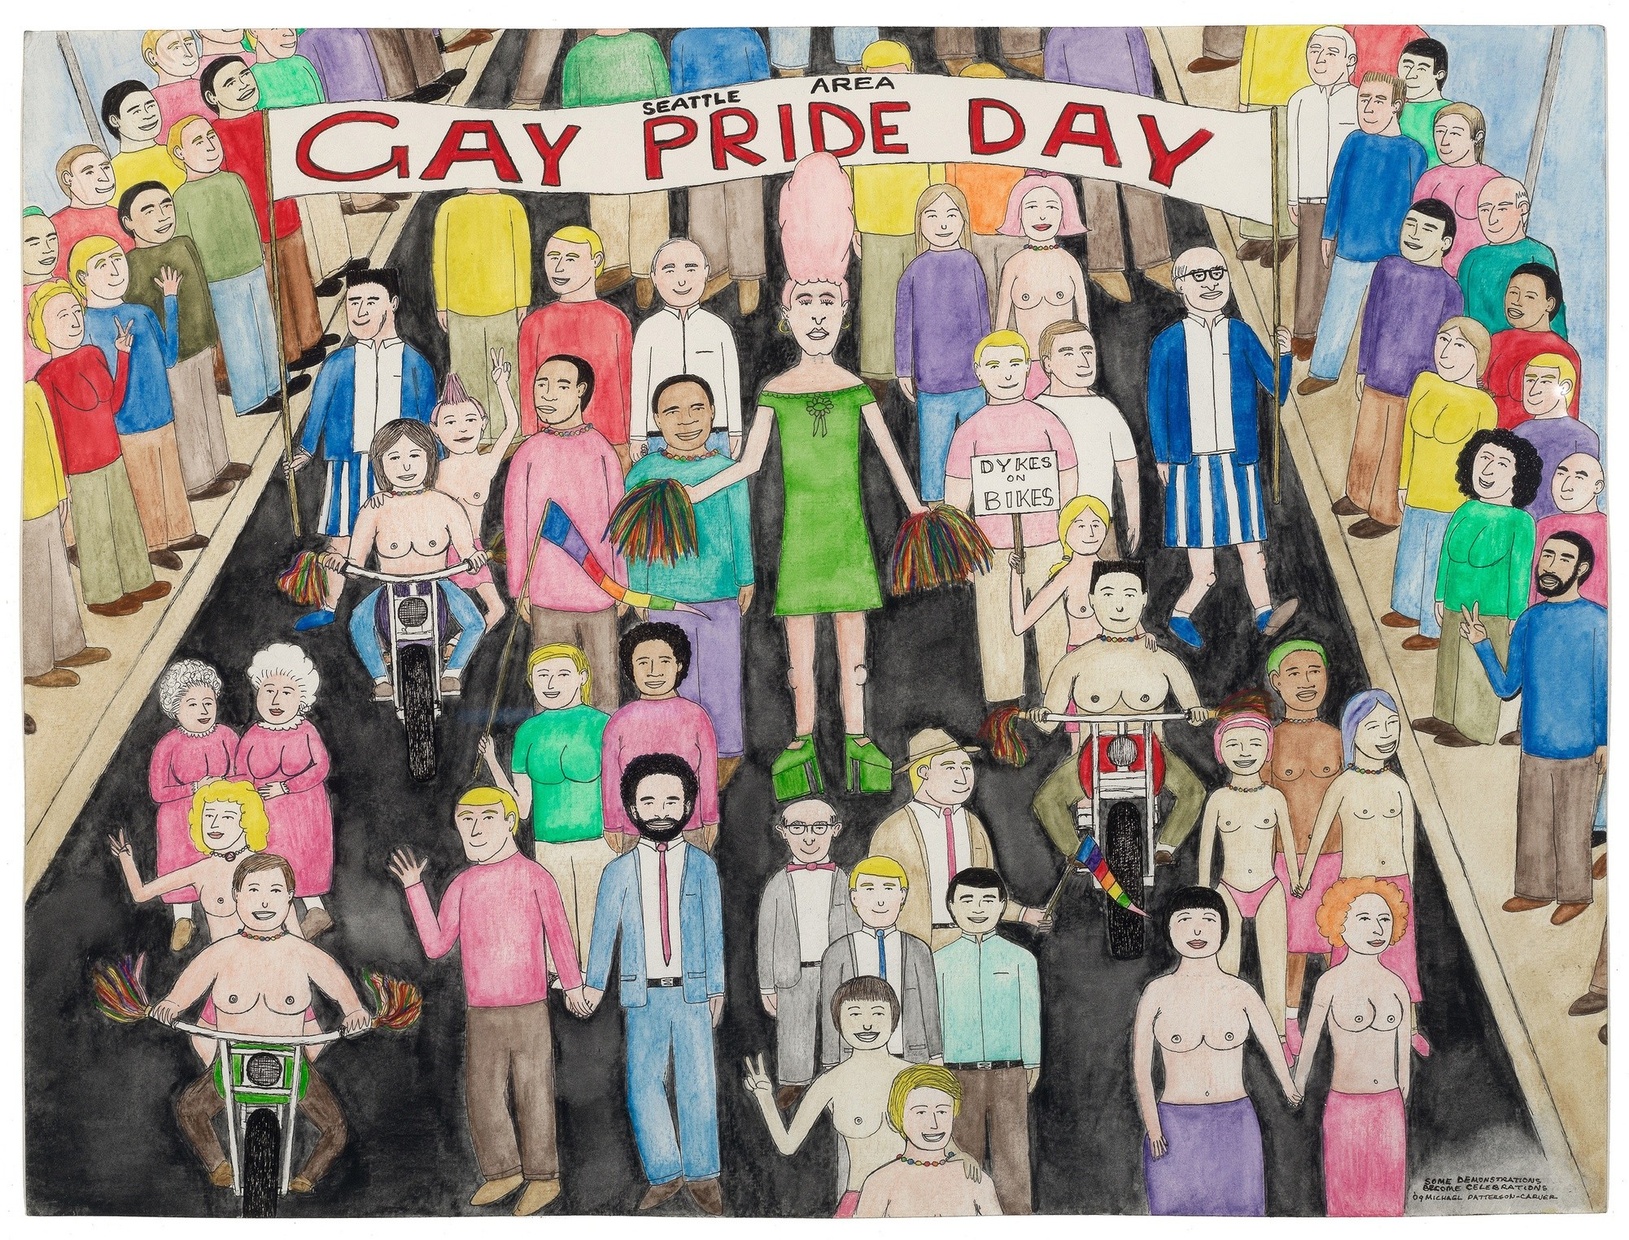 A drawing of people of various genders and ethnicities, some topless, others wearing suits or dresses, in a Seattle gay pride parade; other people watch from the sidewalk smiling.